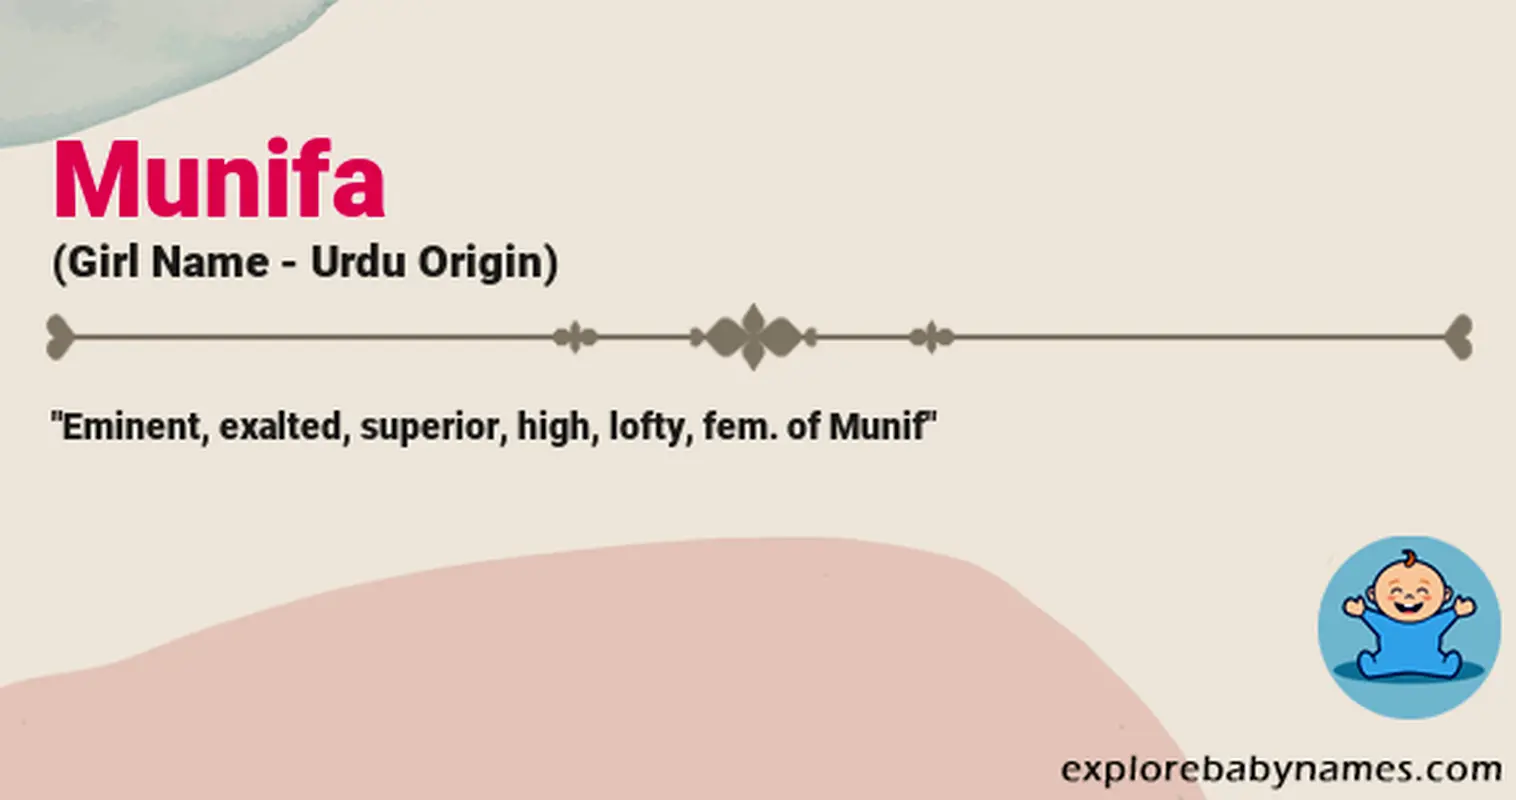 Meaning of Munifa